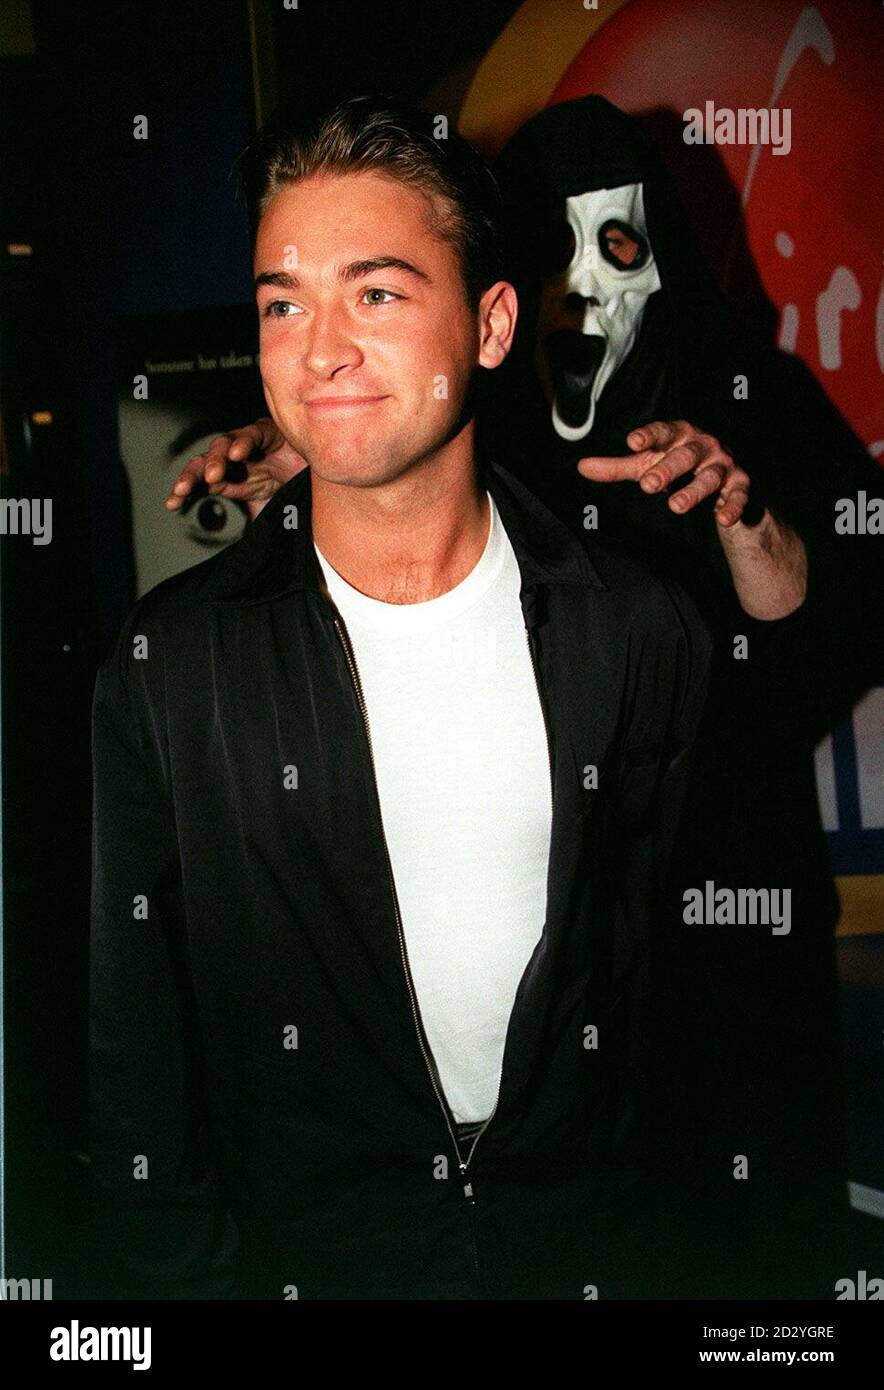 PA NEWS PHOTO 3/4/98 ACTOR PAUL NICHOLLS ATTENDS THE FILM PREMIERE OF  'SCREAM 2' AT THE VIRGIN CINEMA, FULHAM ROAD, LONDON Stock Photo